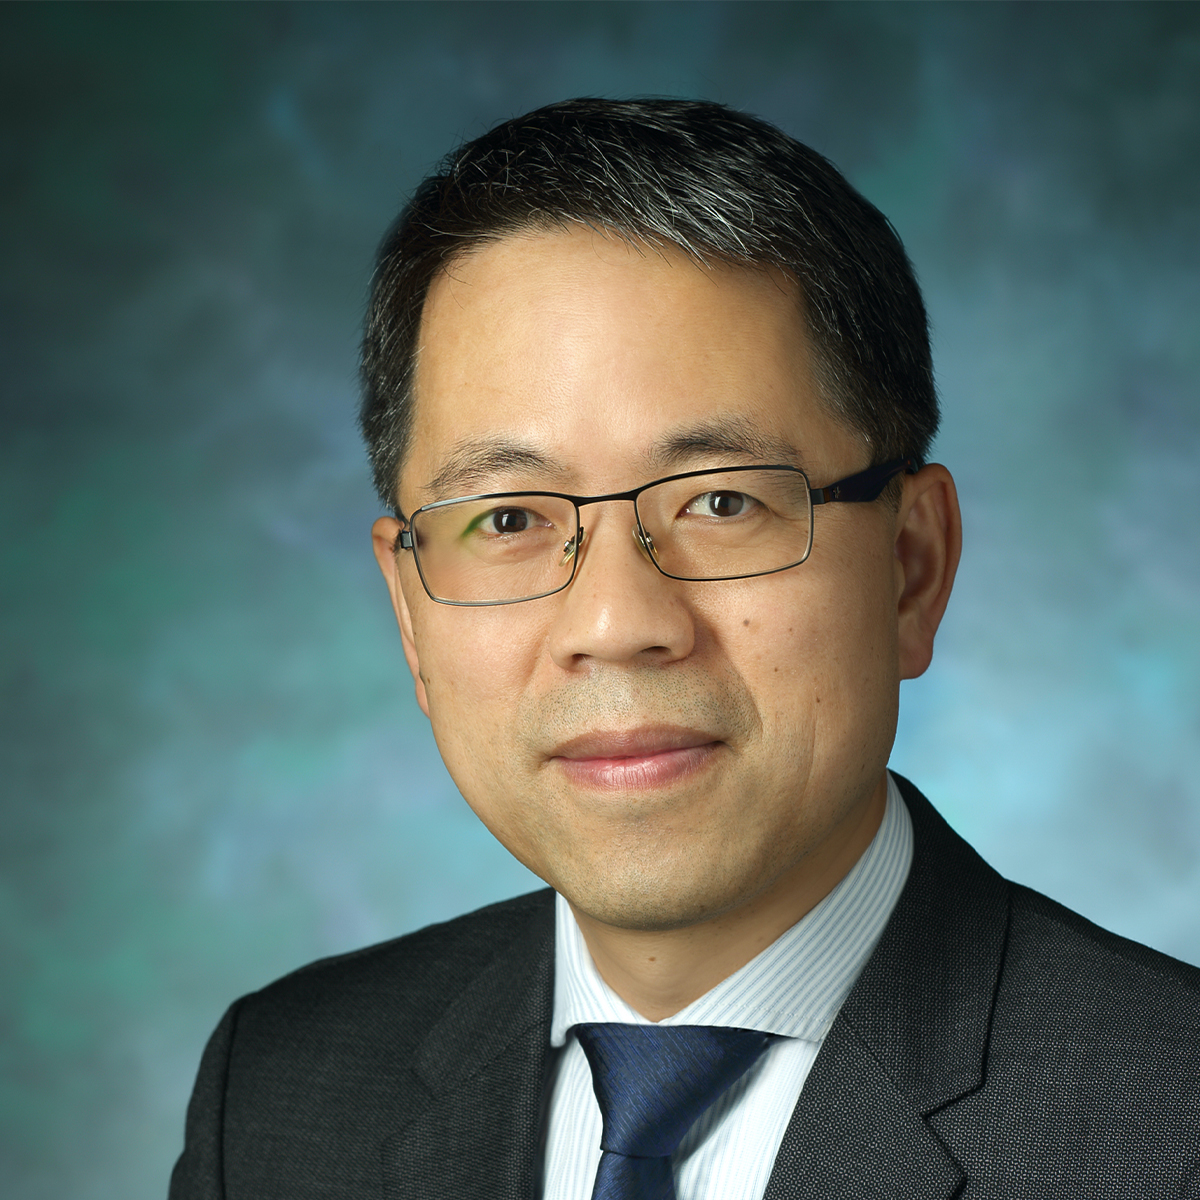 Headshot of Hai-Quan Mao. He has salt and pepper hair and brown eyes. He is wearing black square frame glasses and a gray suit jacket with a blue shirt and dark blue tie.